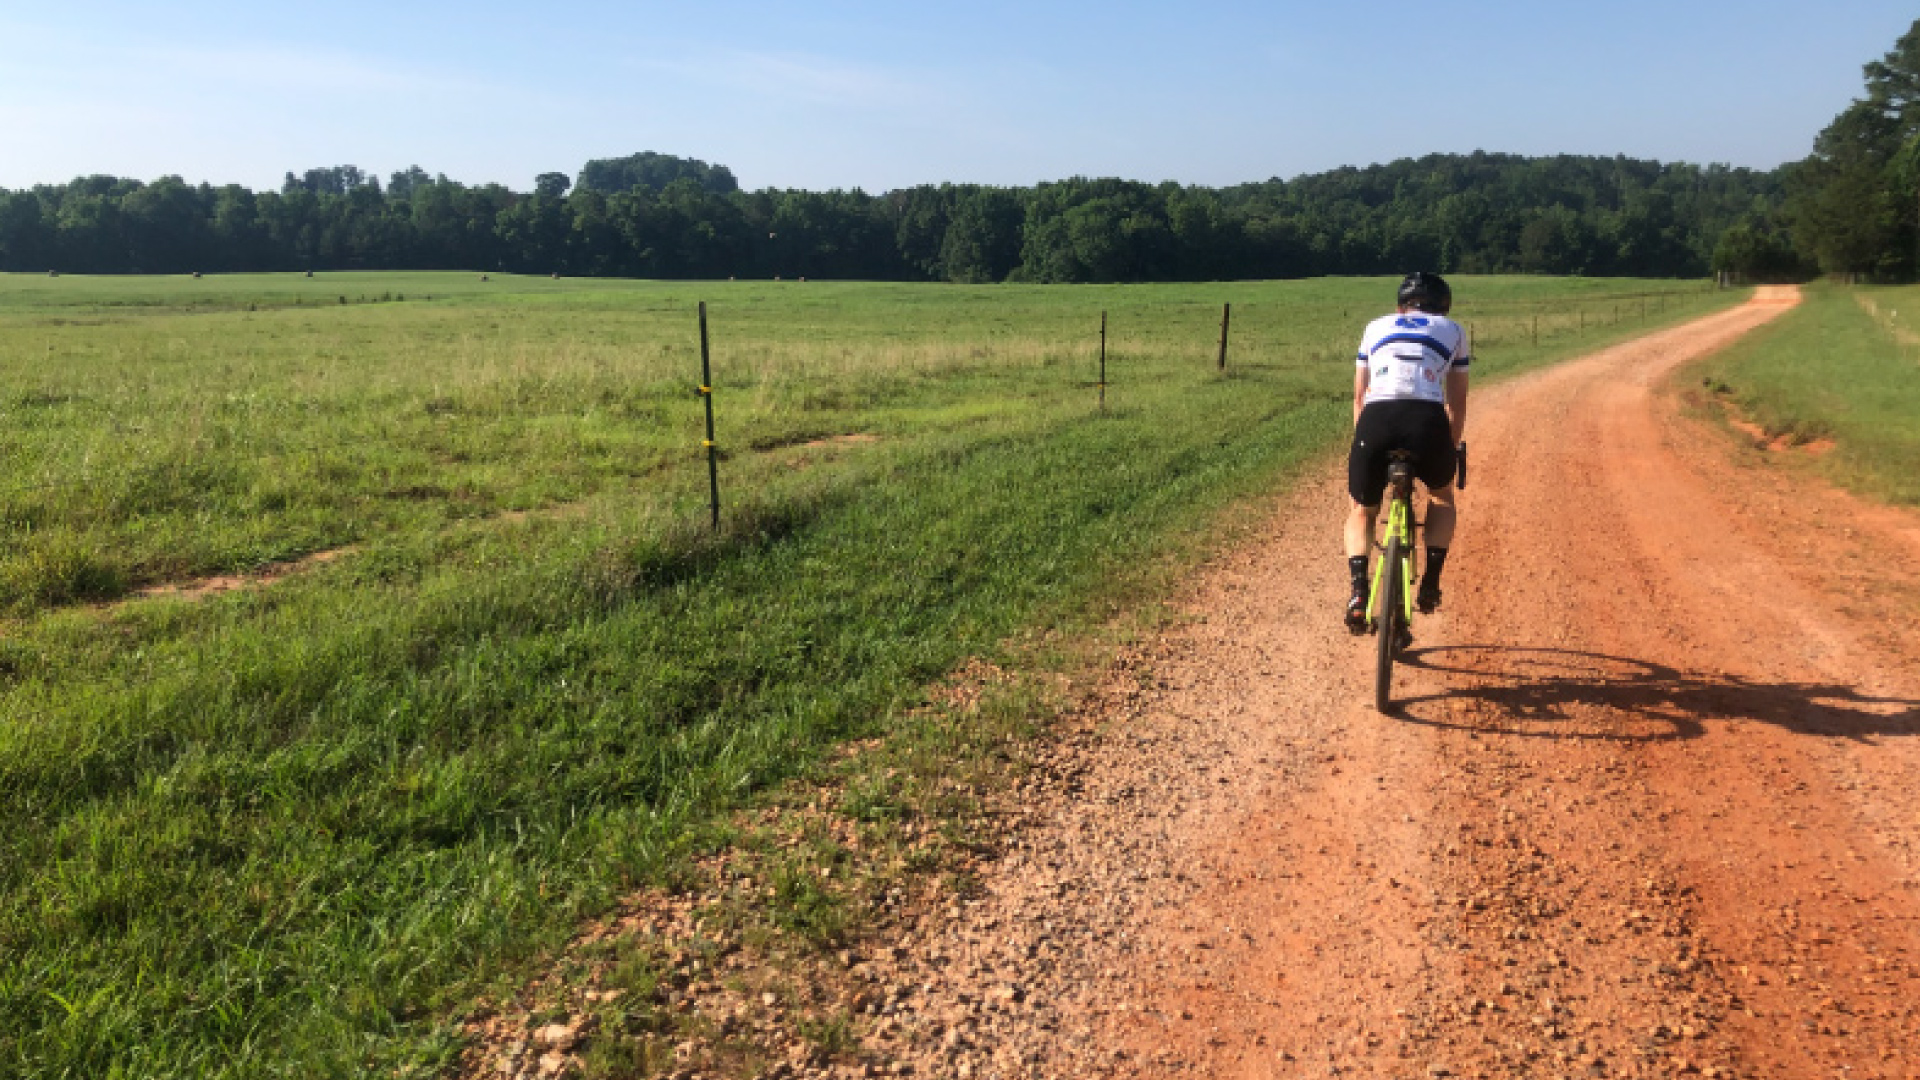 man riding bicycle on gravel road in rural Georgia, United States